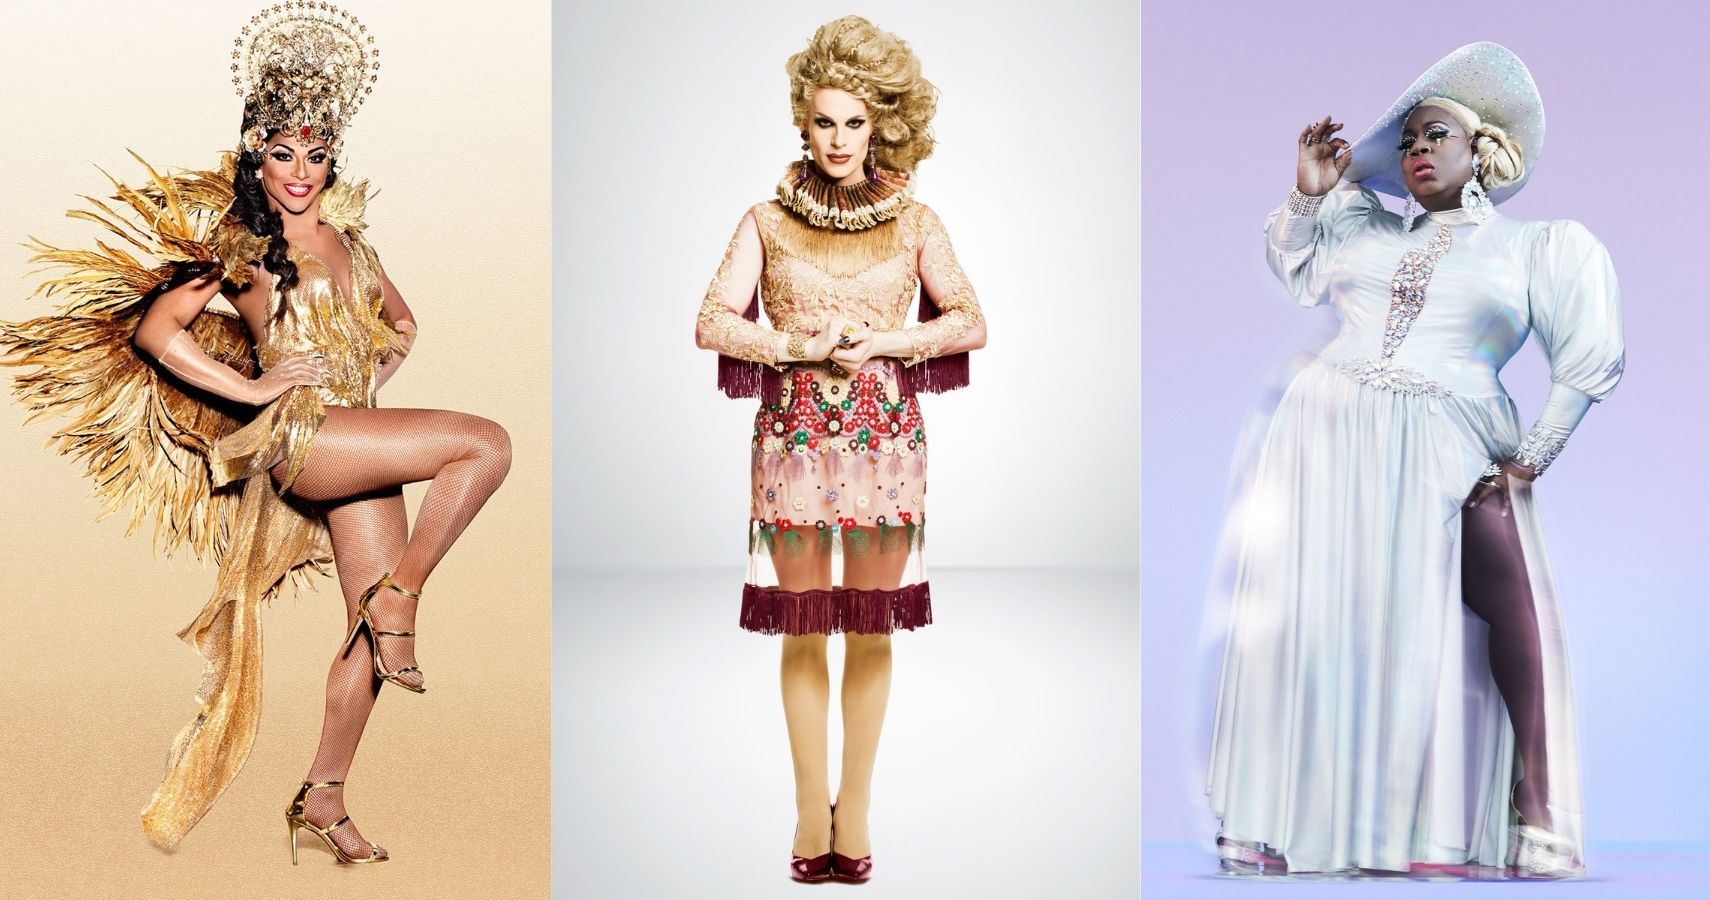 Split image: Shangela, Katya, and Latrice Royale pose for their RuPaul's Drag Race All Stars promo images